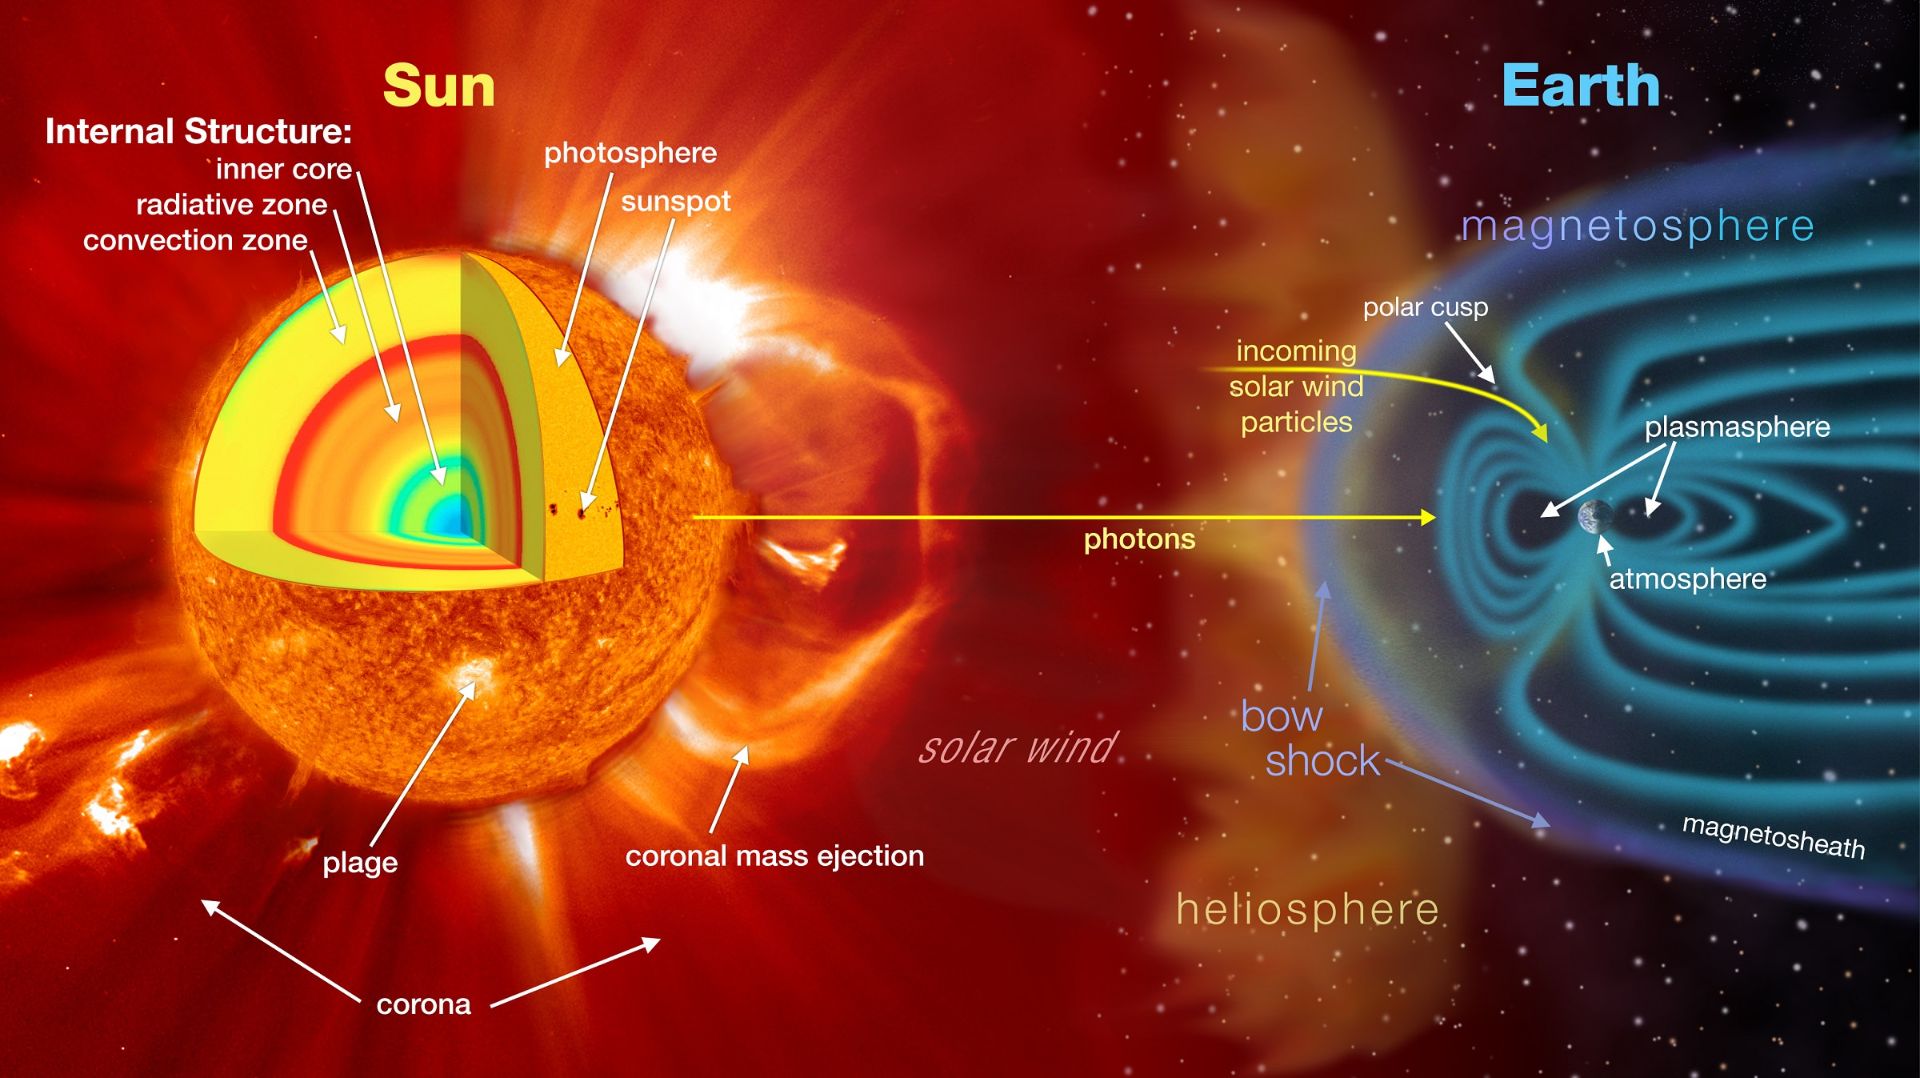 Solar winds bombard the Earth's magnetosphere